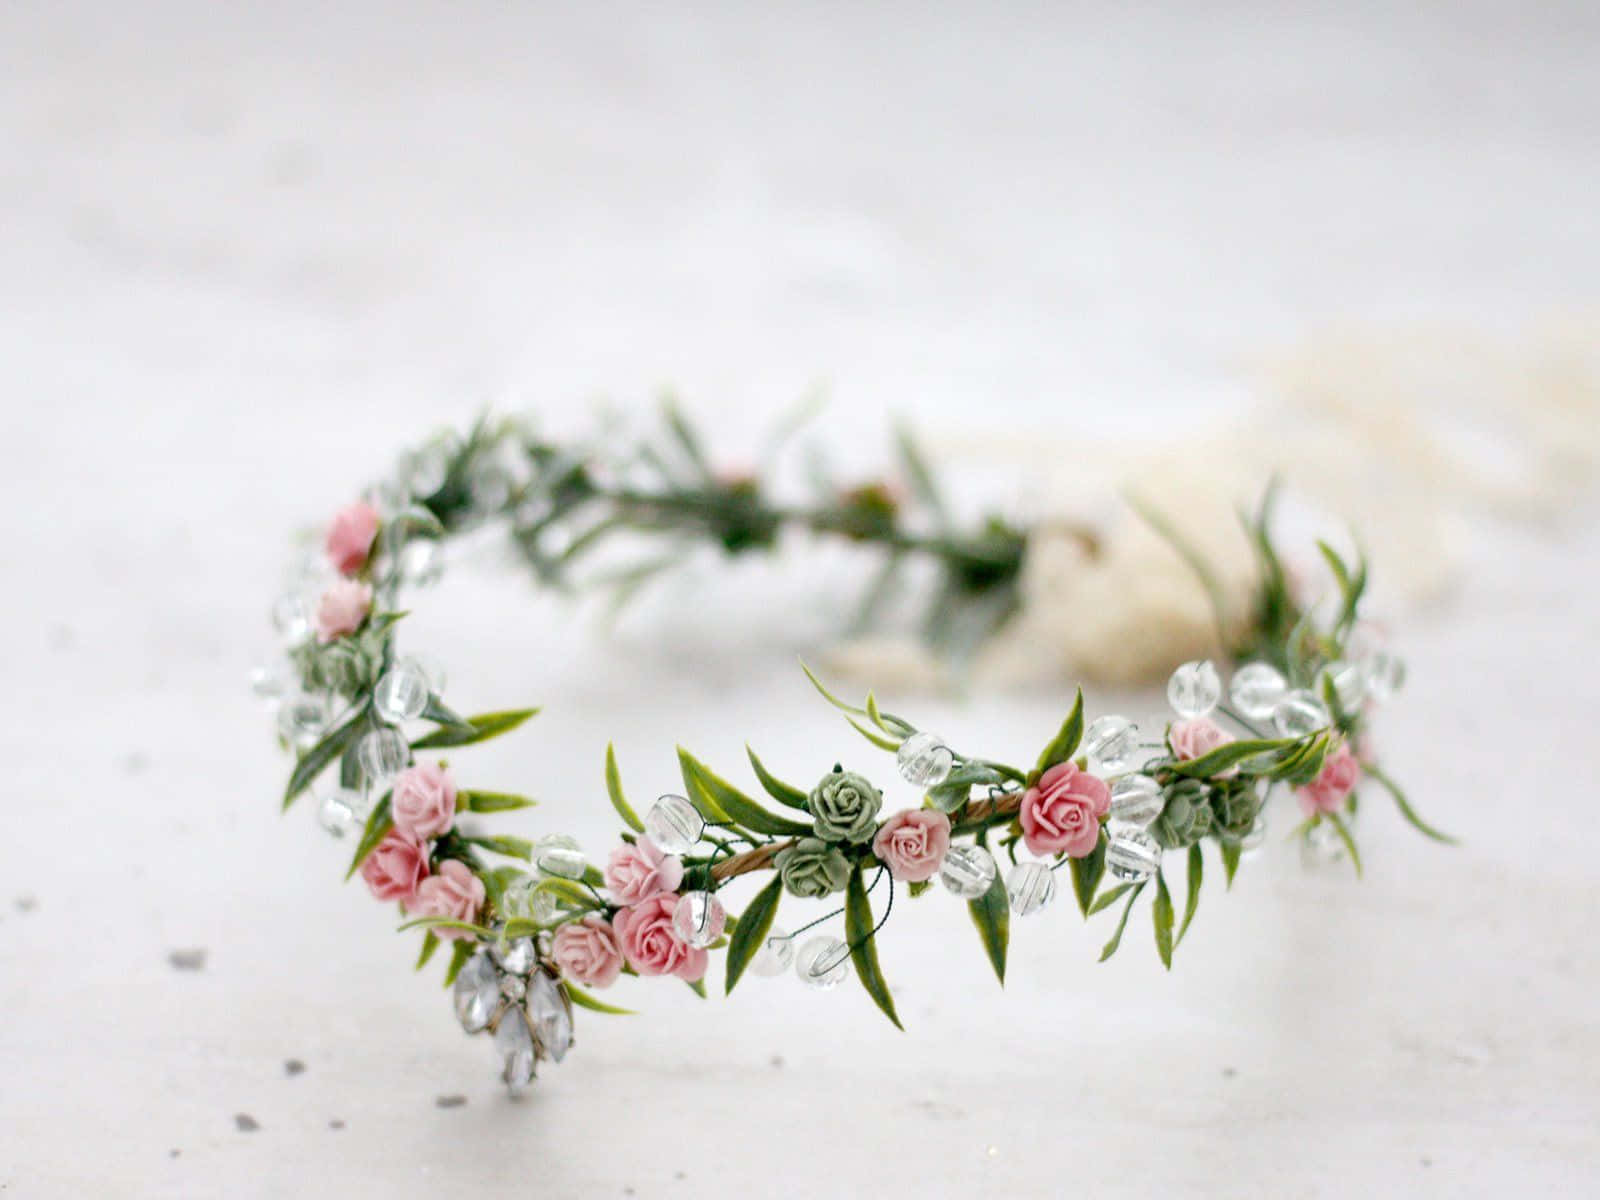 Elegant Floral Crown on a Bright Table Wallpaper